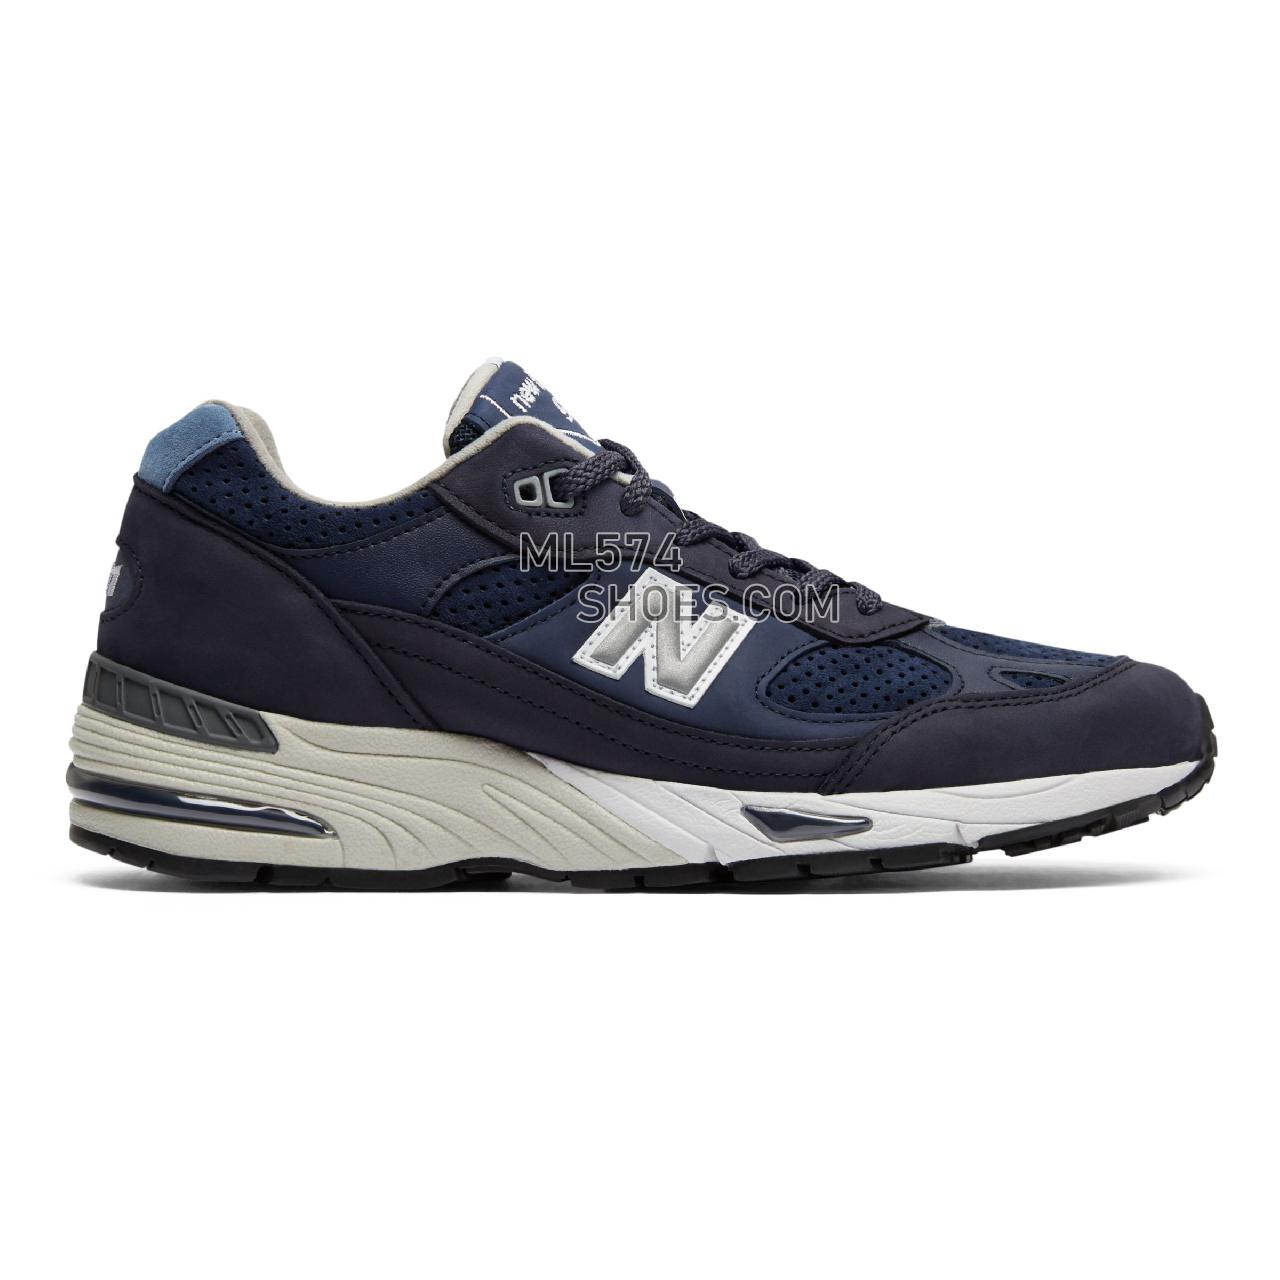 New Balance Made in UK 991 - Men's Made in UK 991 Classic - Navy with Blue and Grey - M991NVT